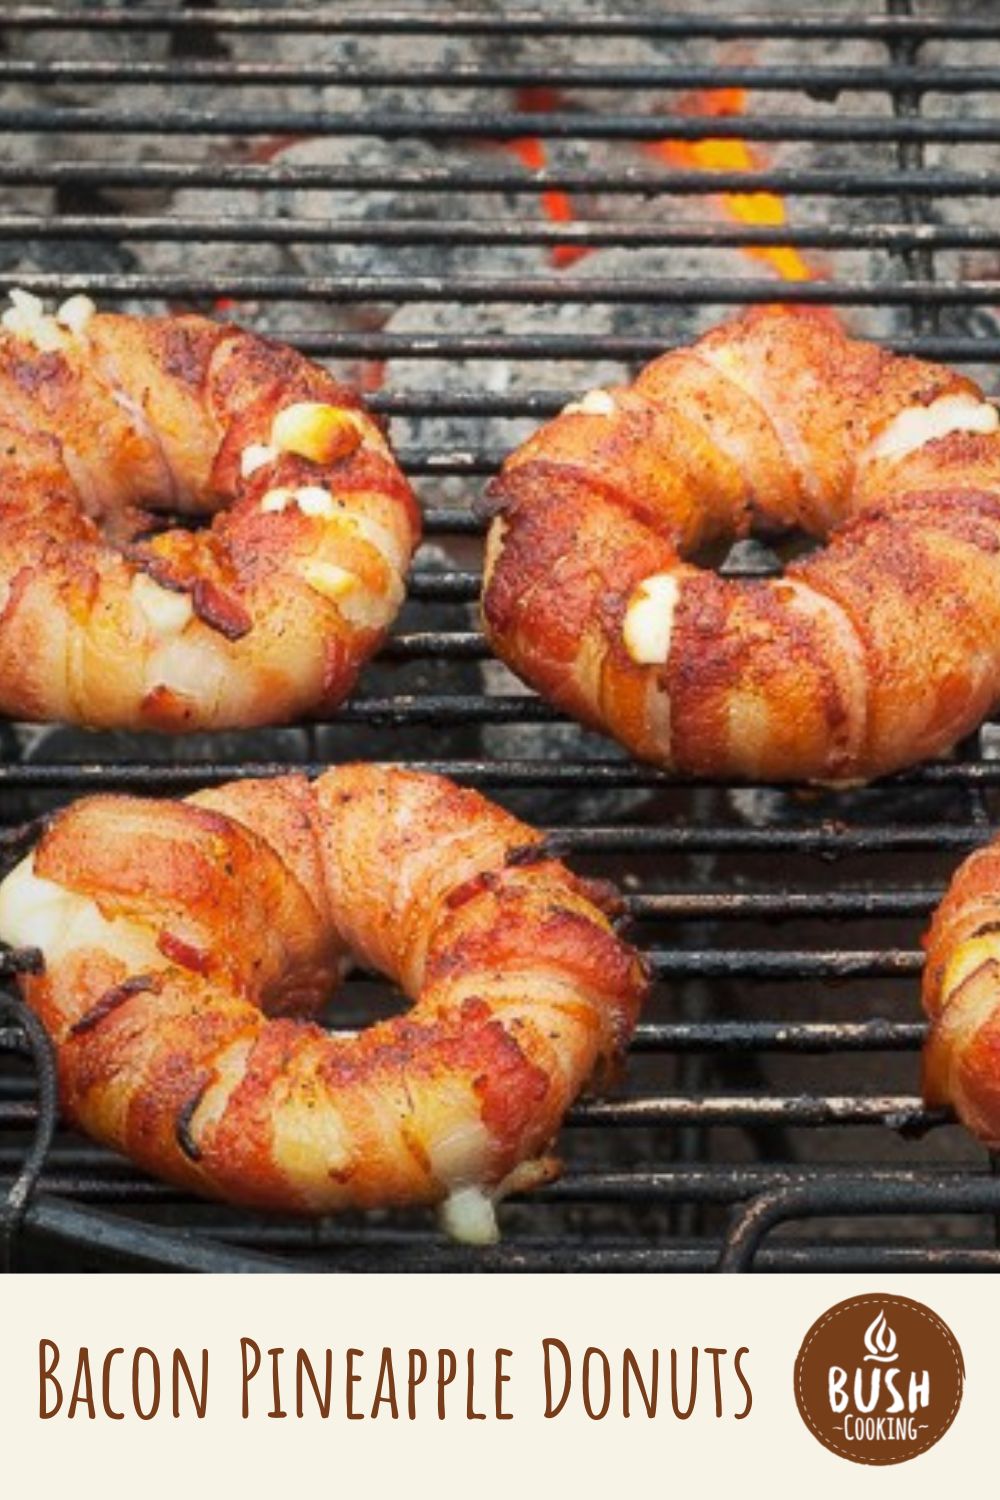 Bacon | Cooking Donuts Bush Pineapple